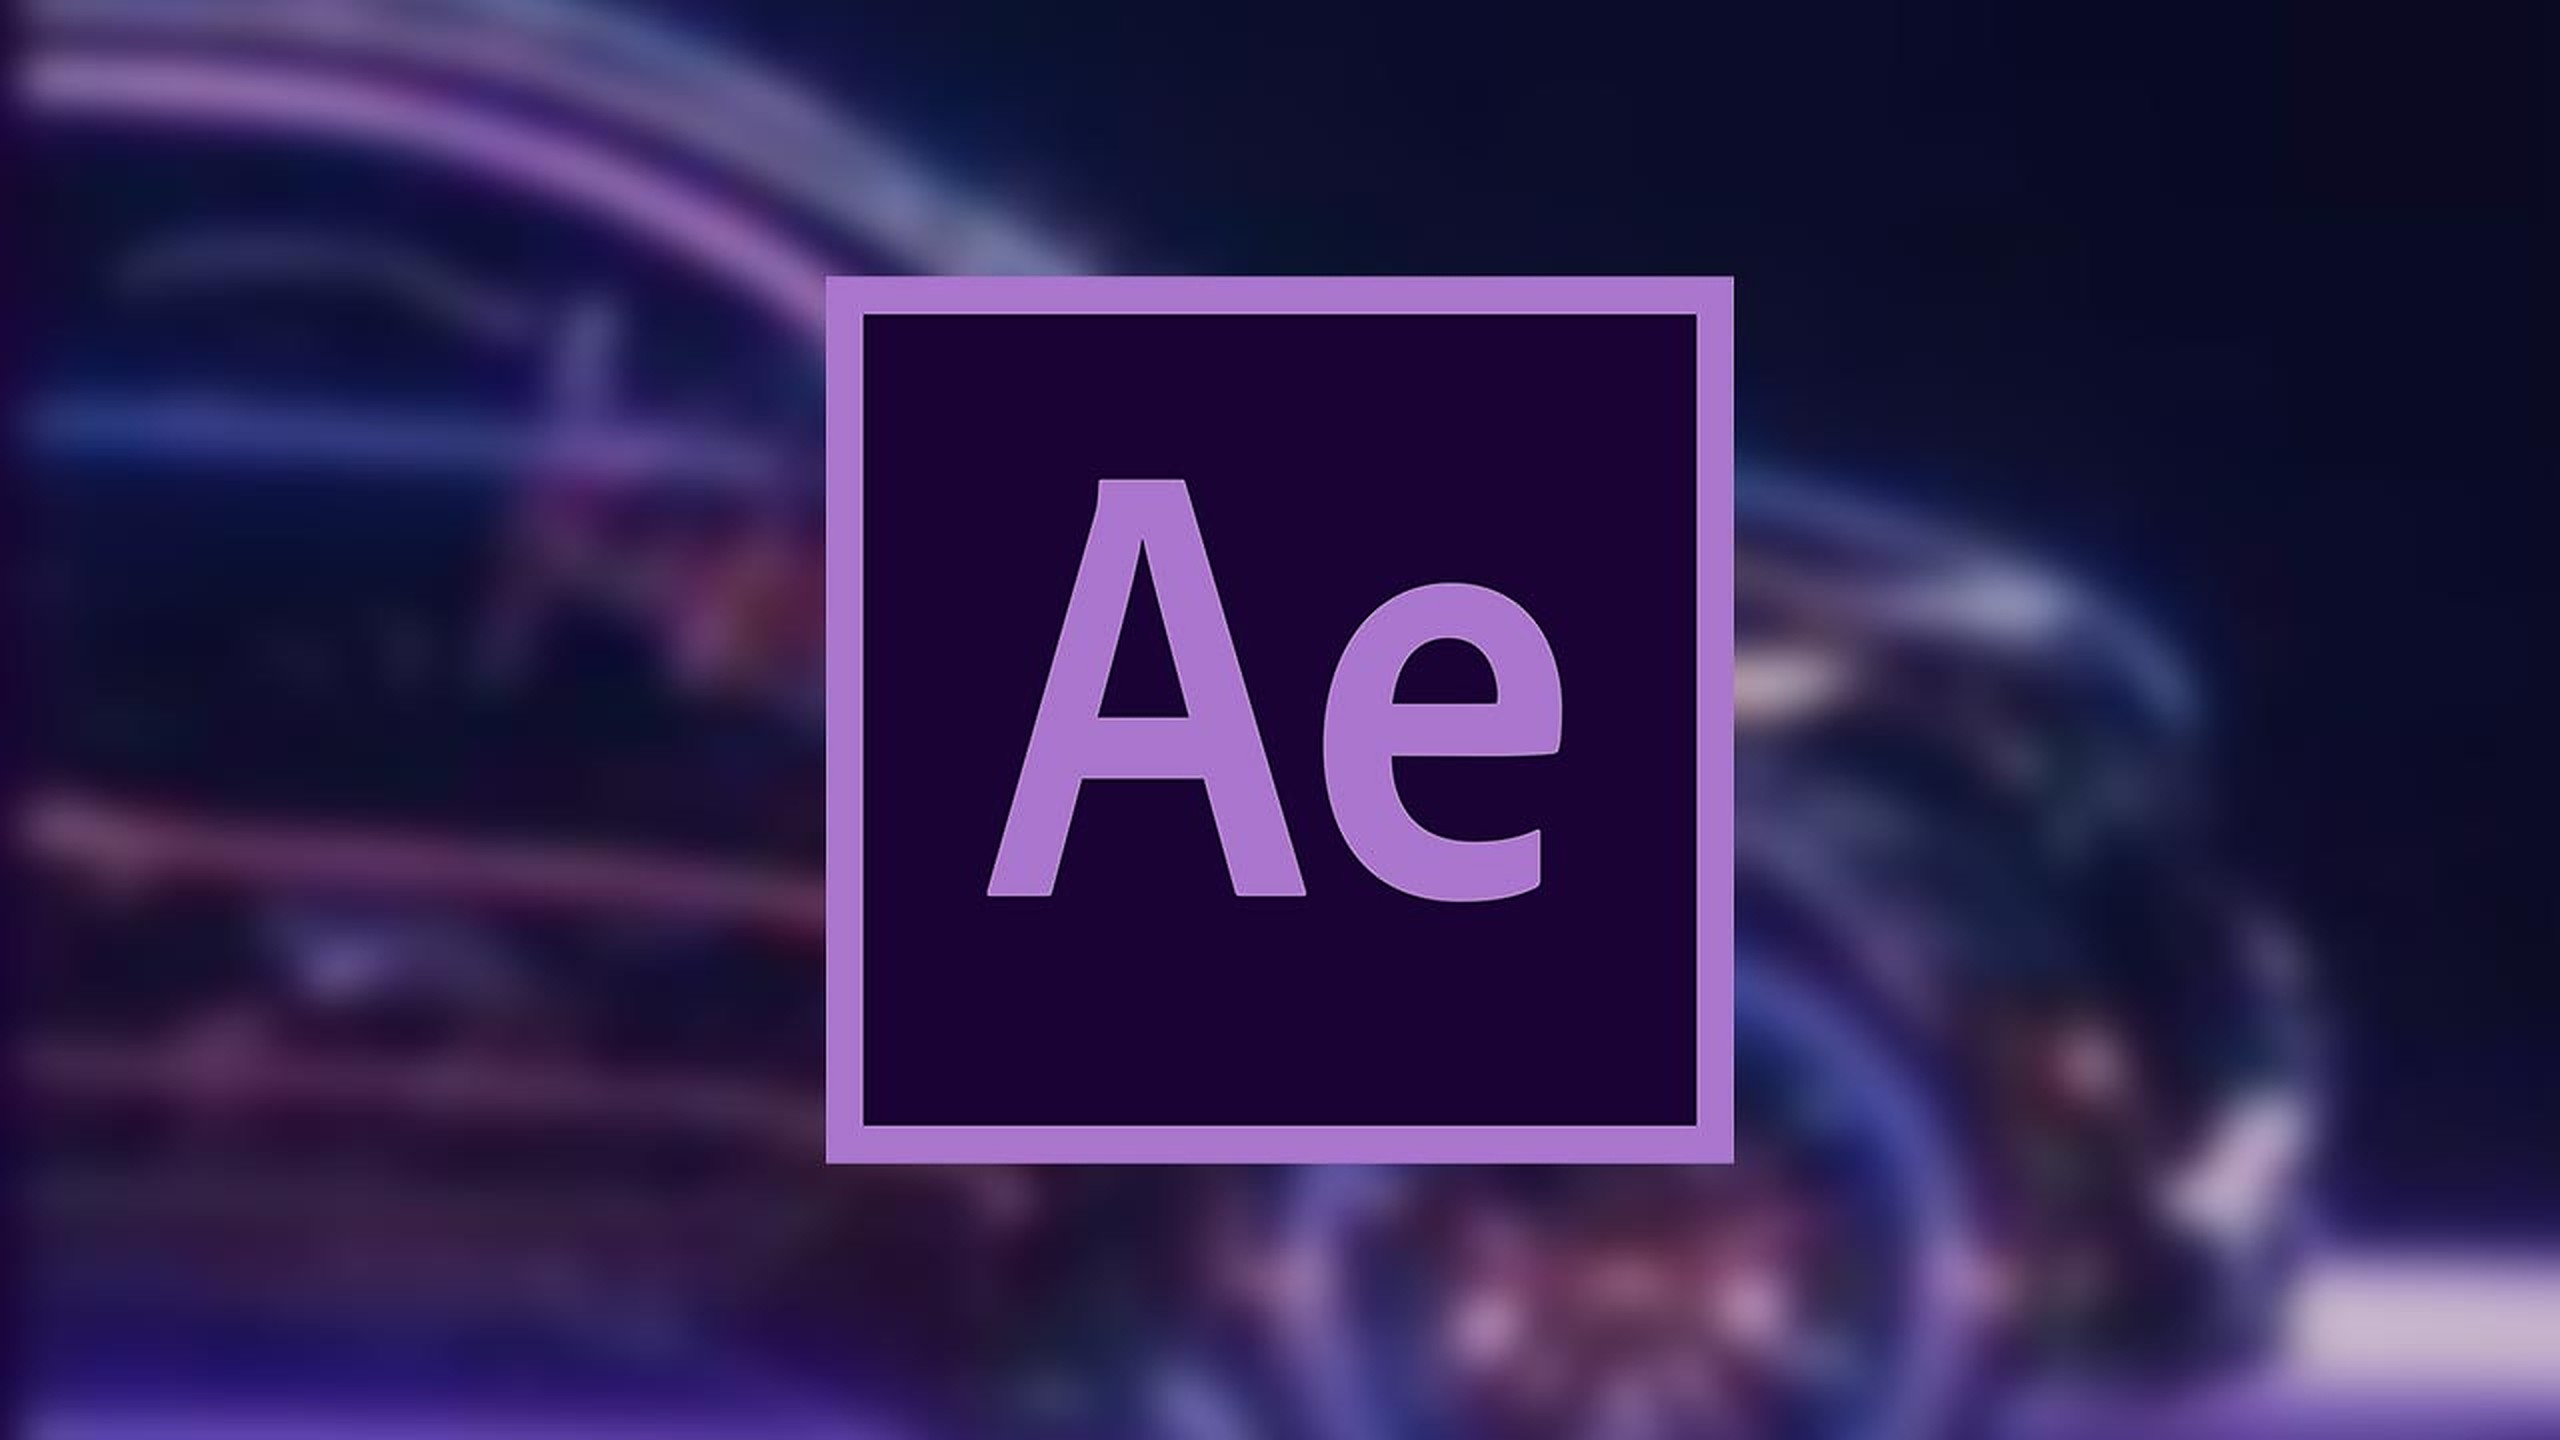 Adobe effects 2022. Adobe after Effects логотип. Adobe after Effects 2020. Adobe after Effects 2021. Adobe after Effects cc 2020.